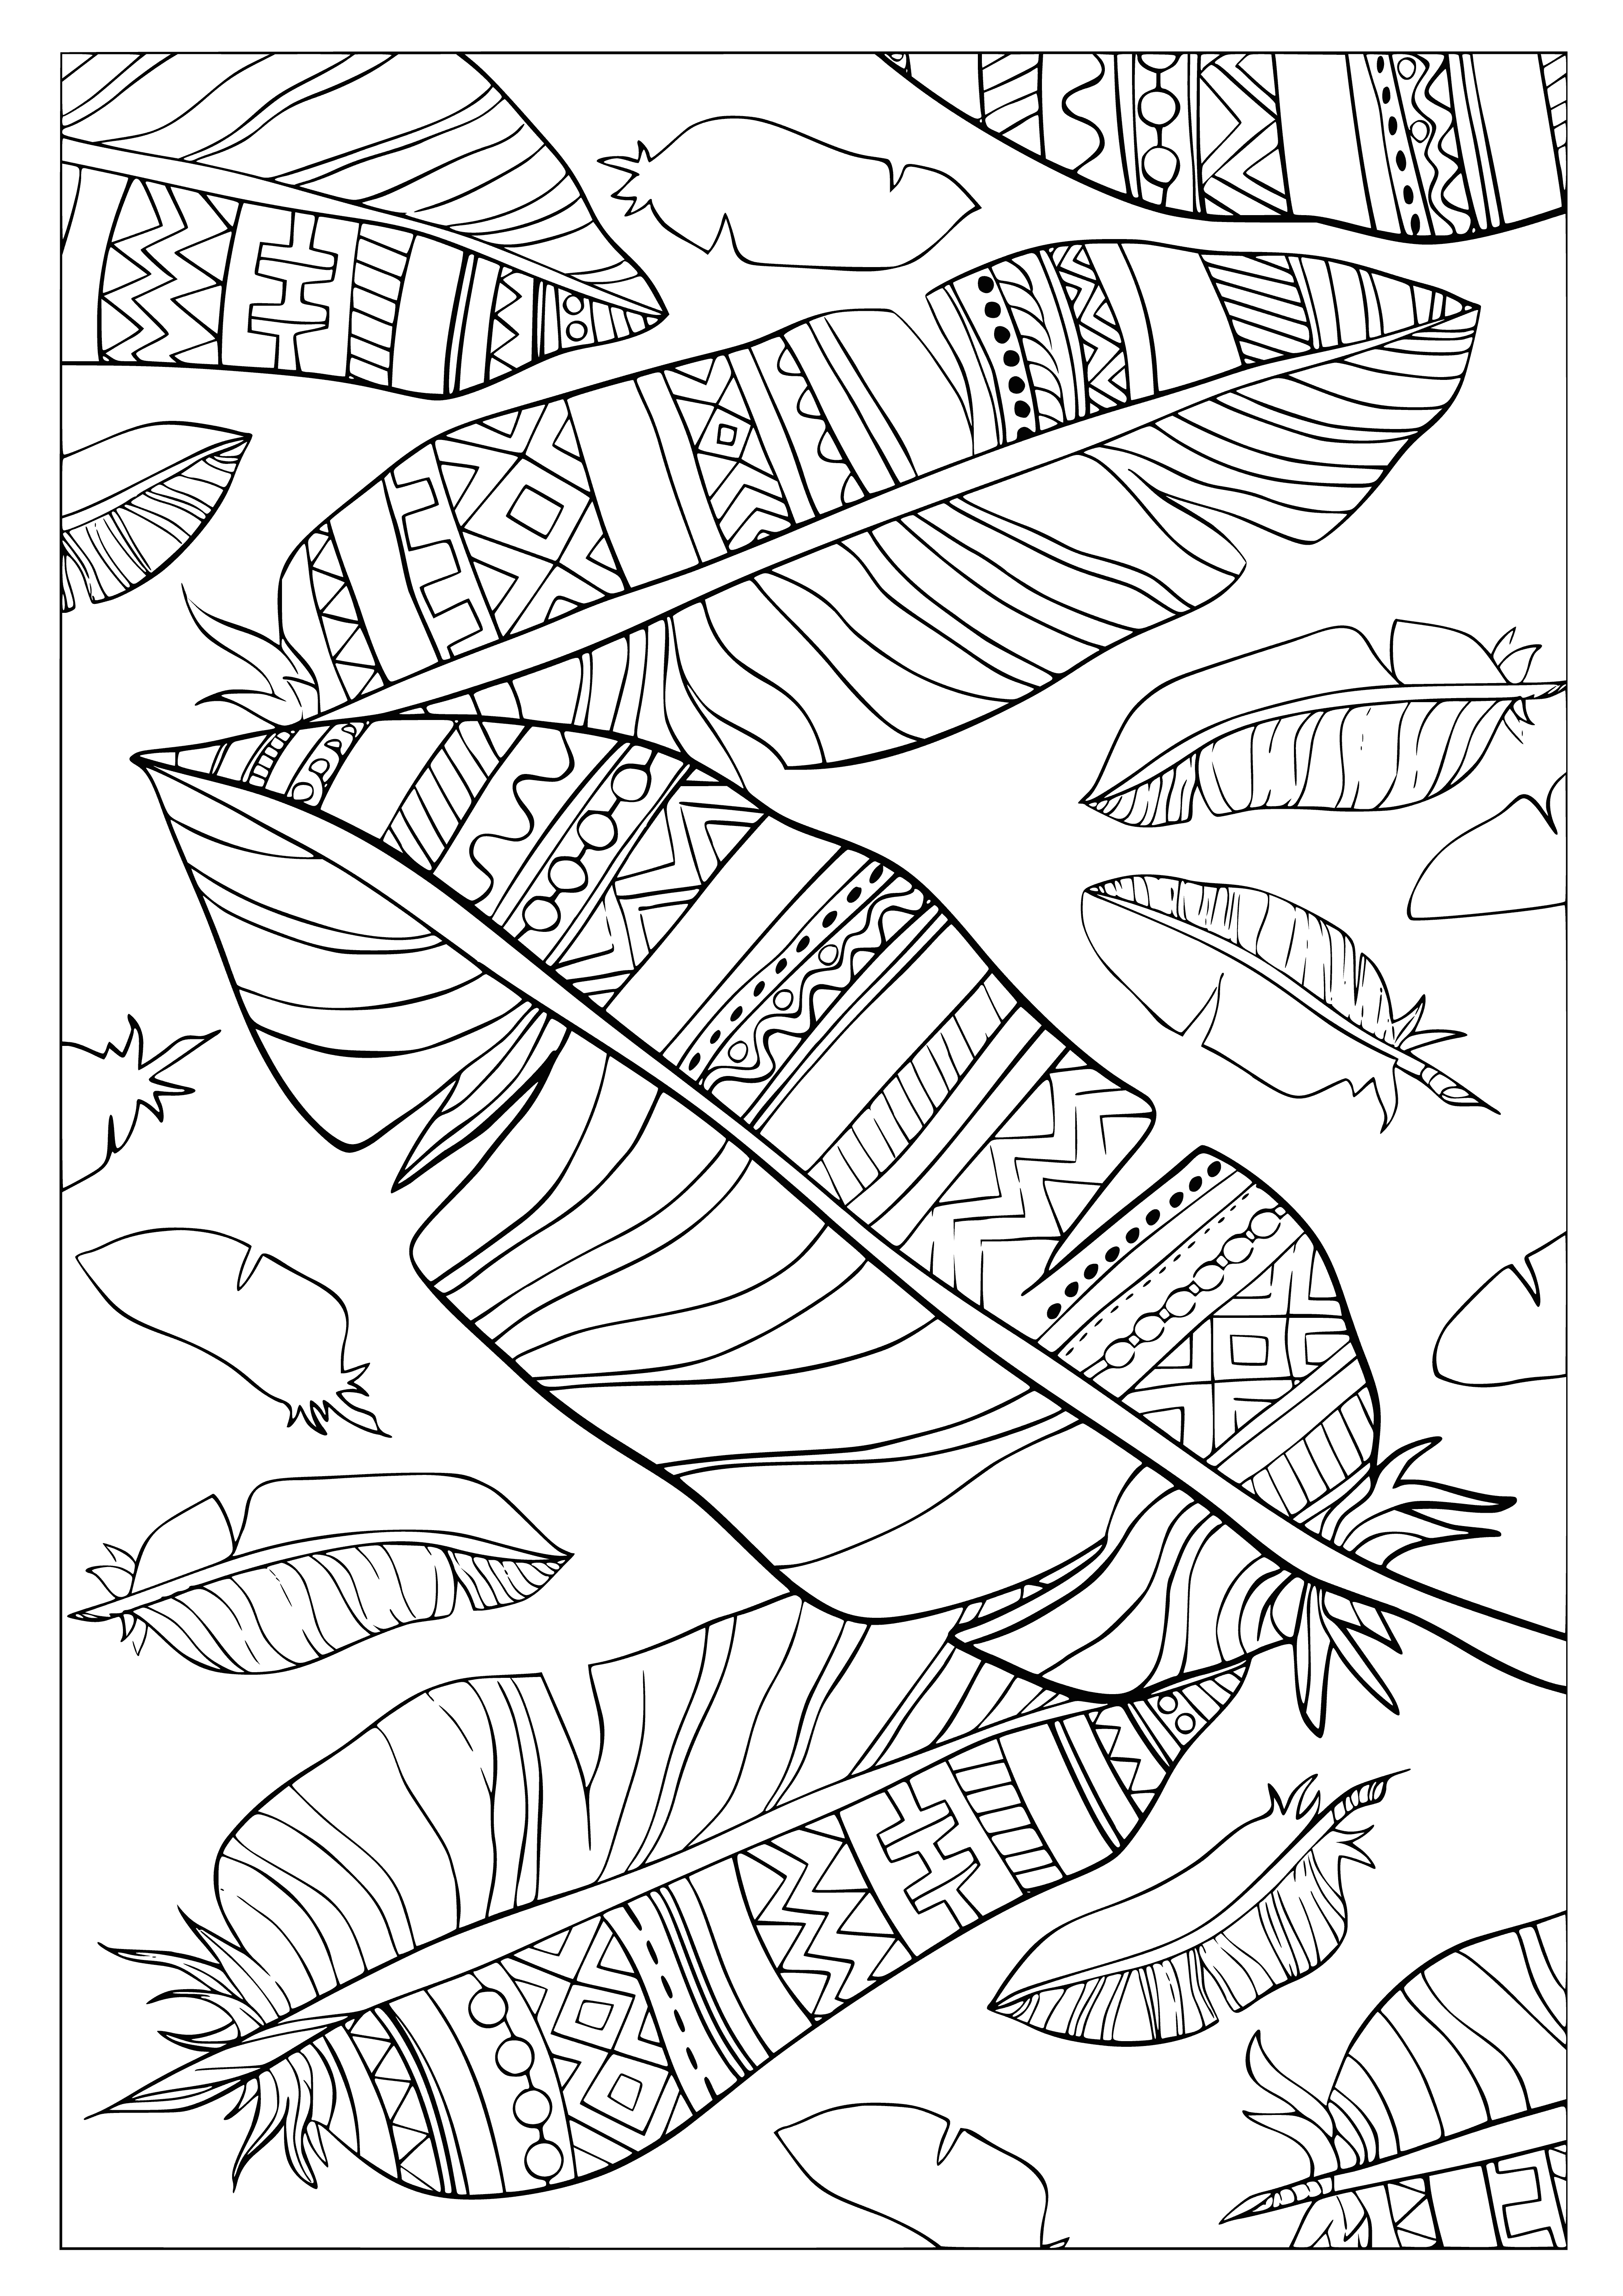 Feathers in the air coloring page